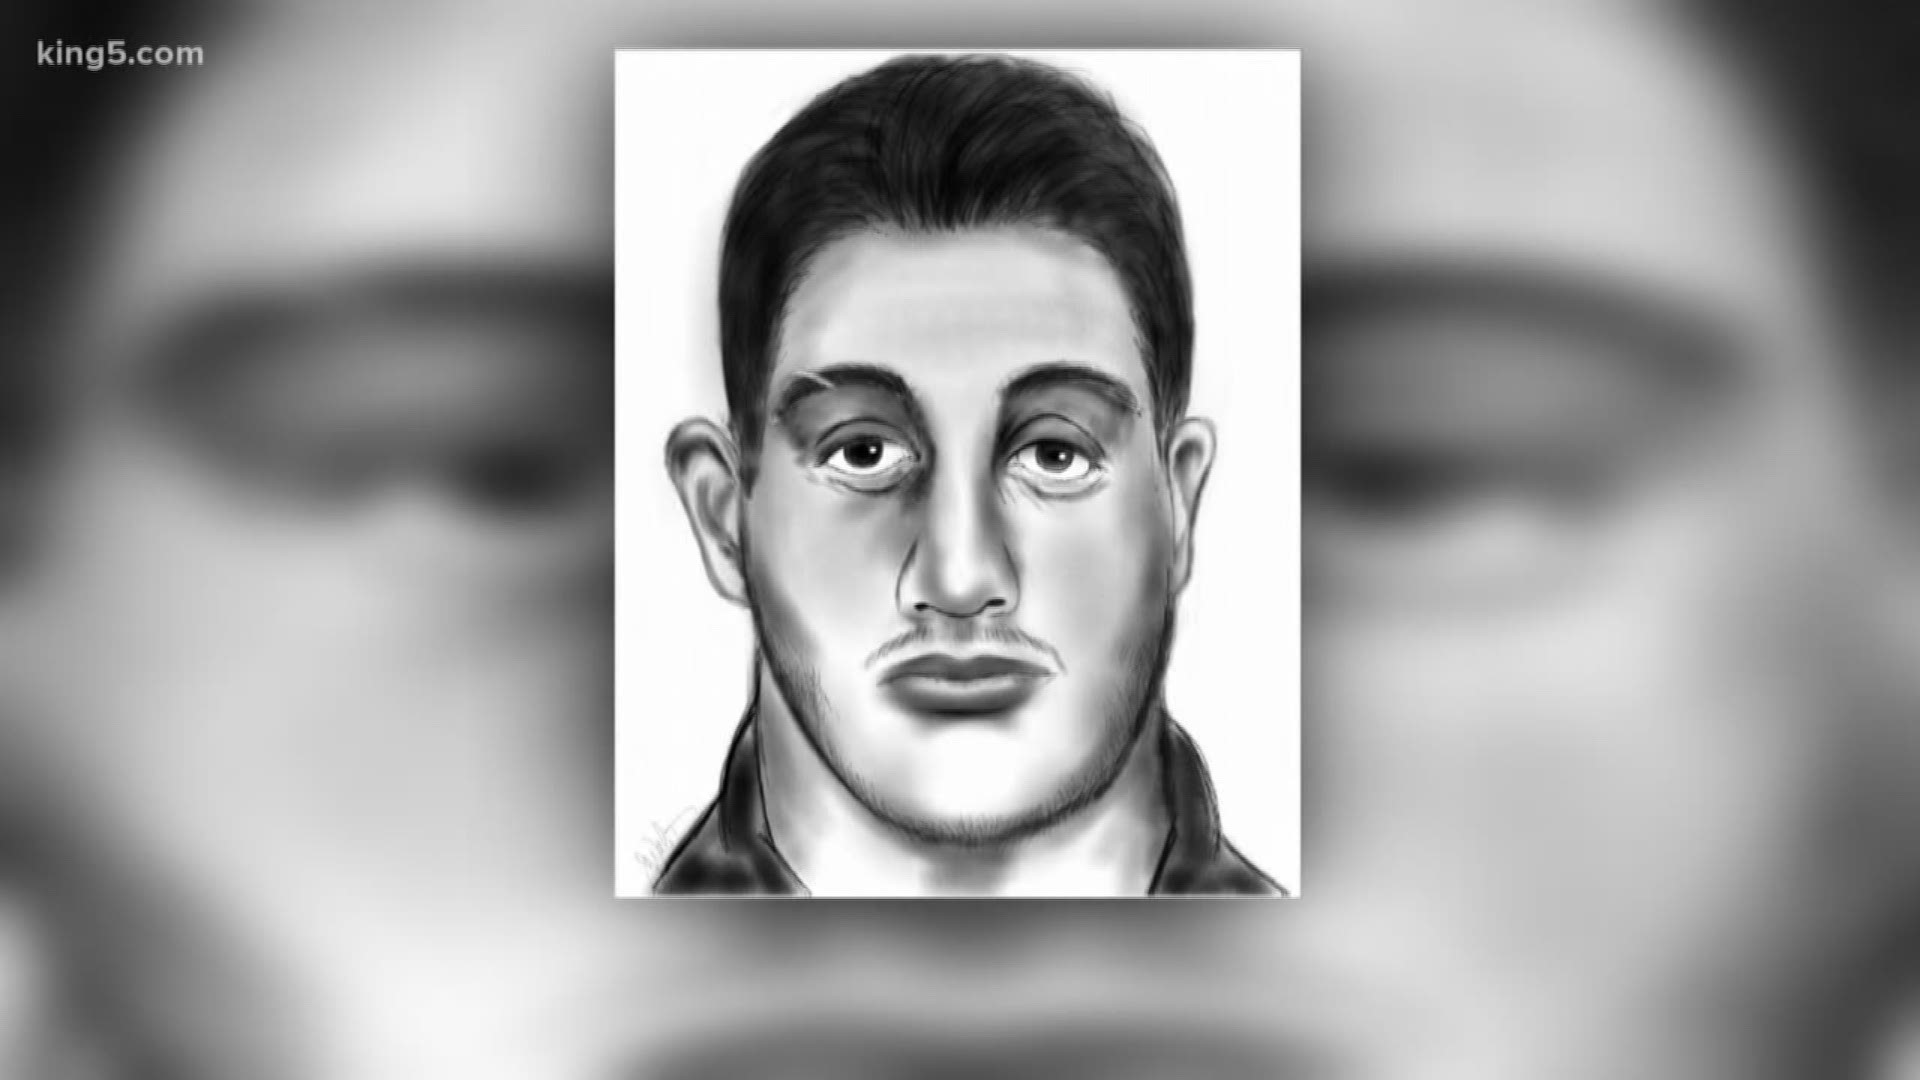 The King County Sheriff’s Office released a sketch of a man suspected of sexually assaulting a 15-year-old girl in Kent.